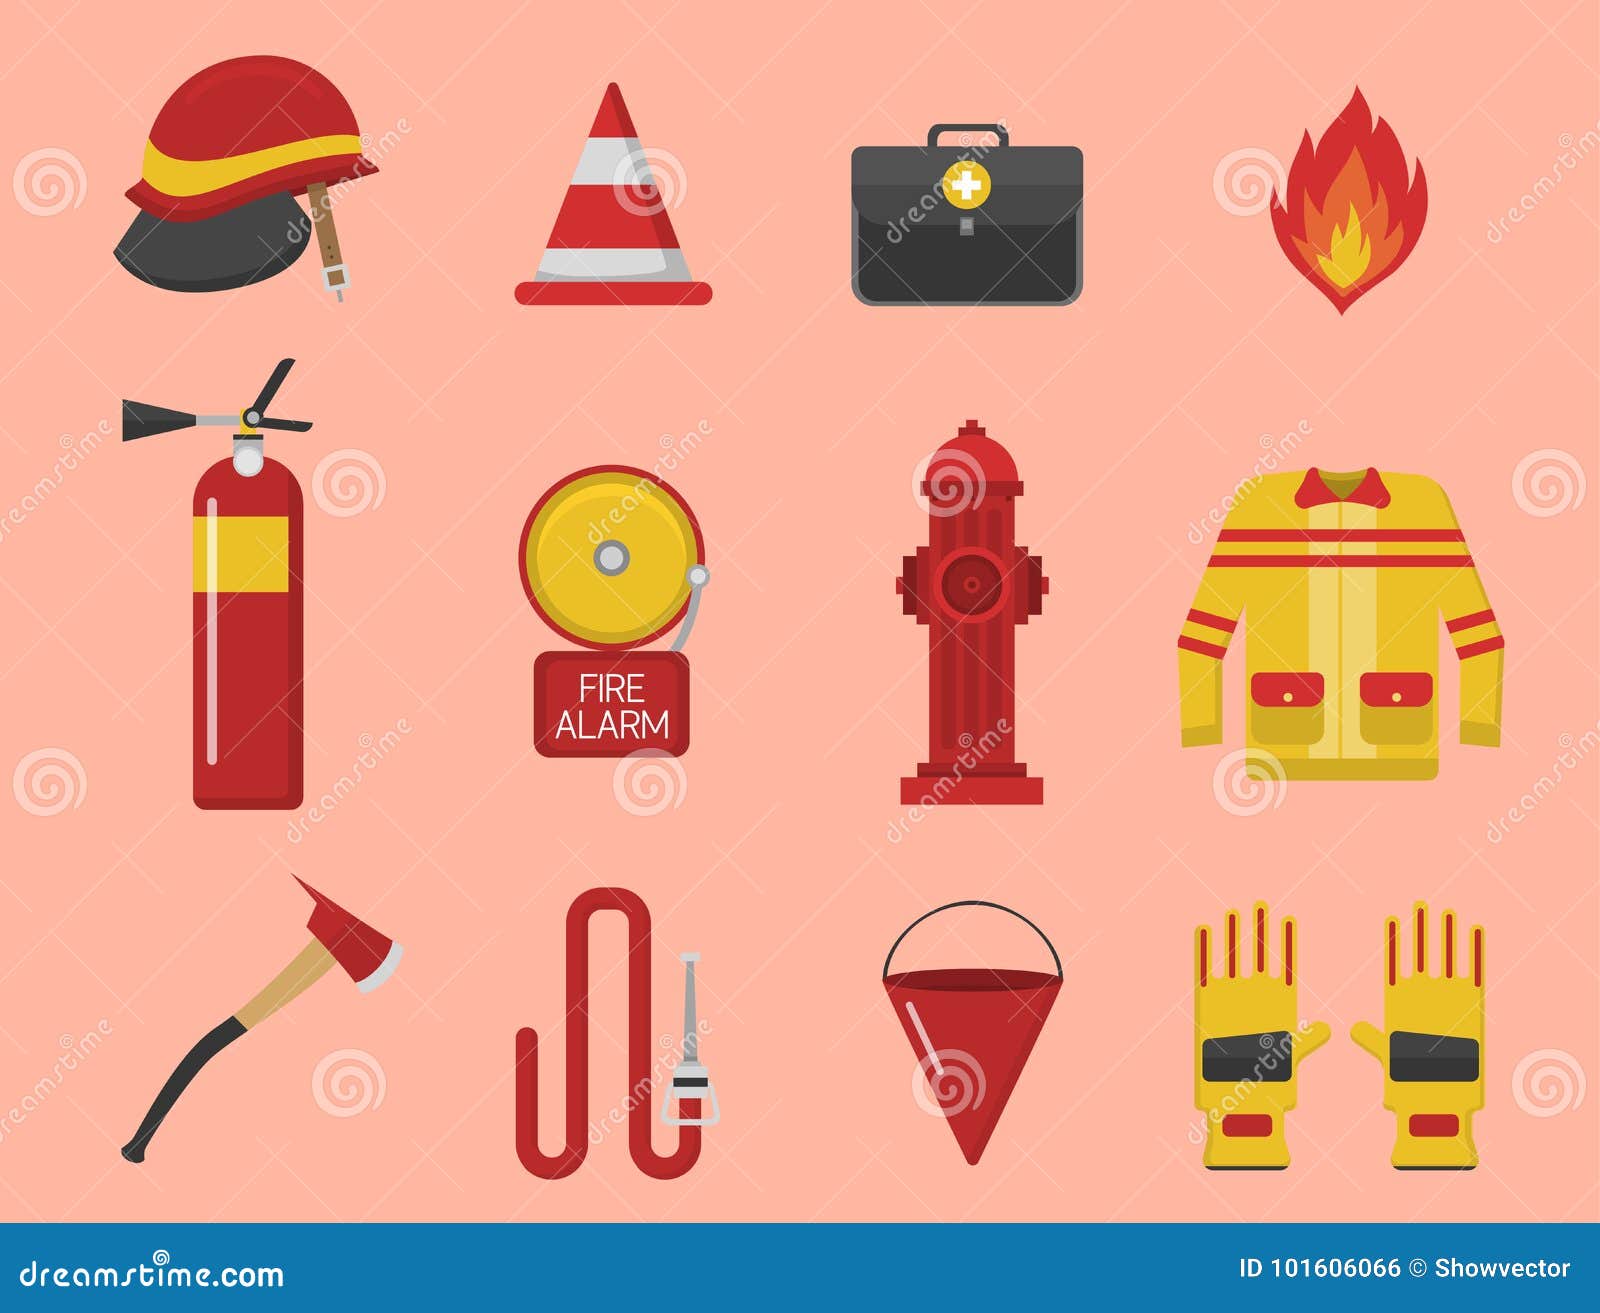 https://thumbs.dreamstime.com/z/fire-safety-equipment-emergency-tools-firefighter-fire-safety-equipment-emergency-icons-firefighter-symbols-safe-danger-accident-101606066.jpg